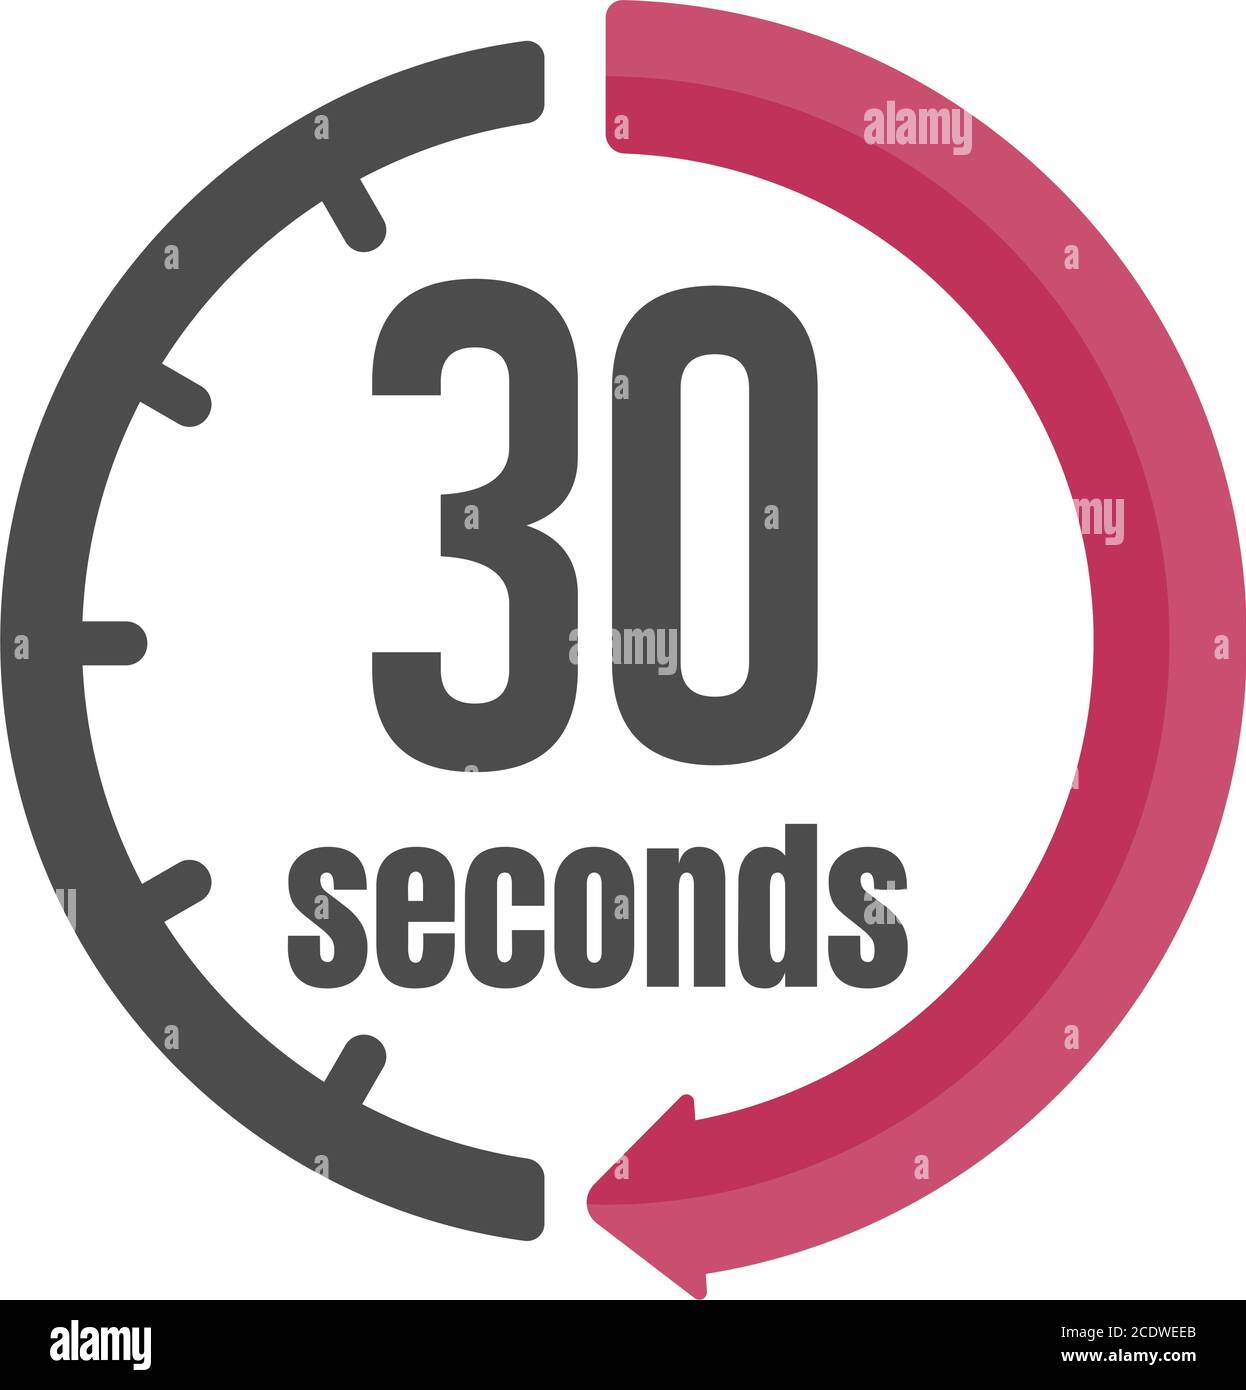 30 seconds vector vectors photography images - Alamy